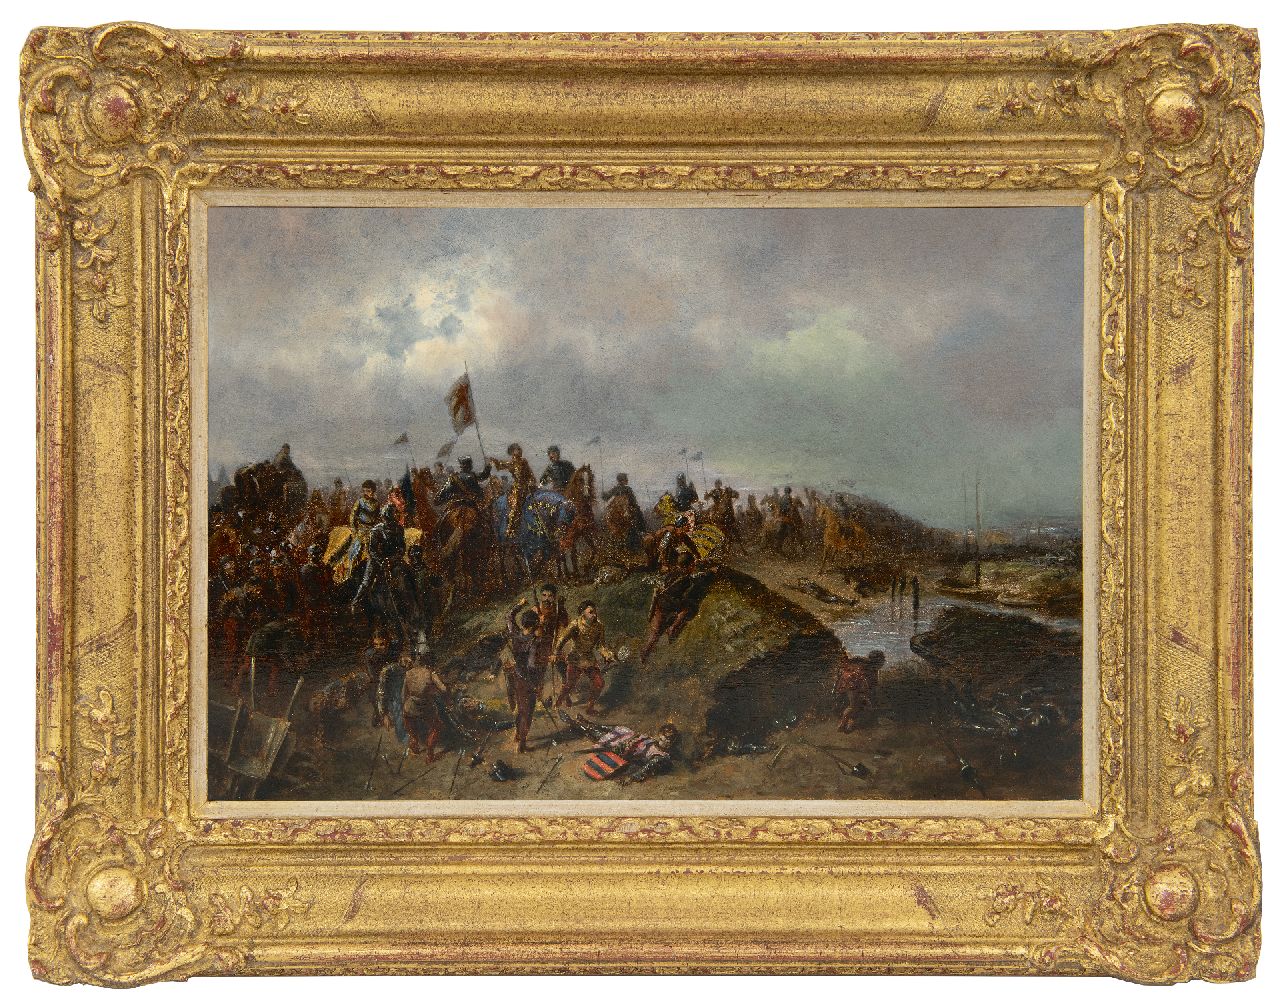 Fardon P.J.  | Pierre Jean Fardon | Paintings offered for sale | After the battle, oil on panel 26.0 x 36.2 cm, signed l.r.